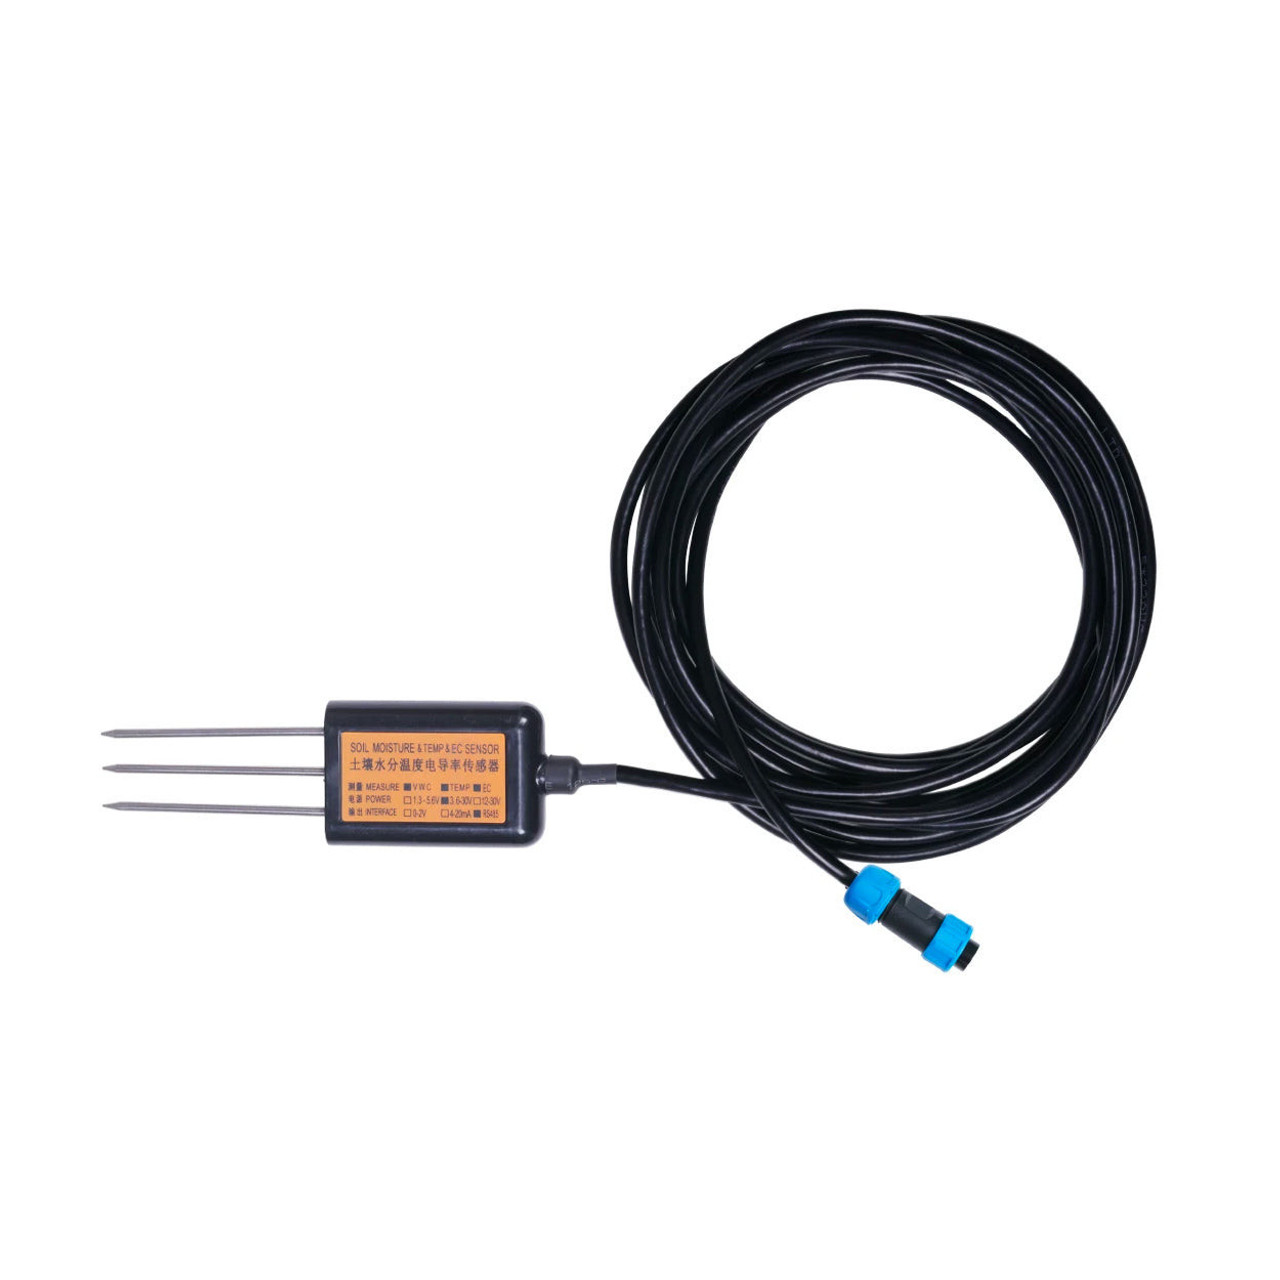 Modbus Outdoor Sensor for Relative Humidity and High-Temperature